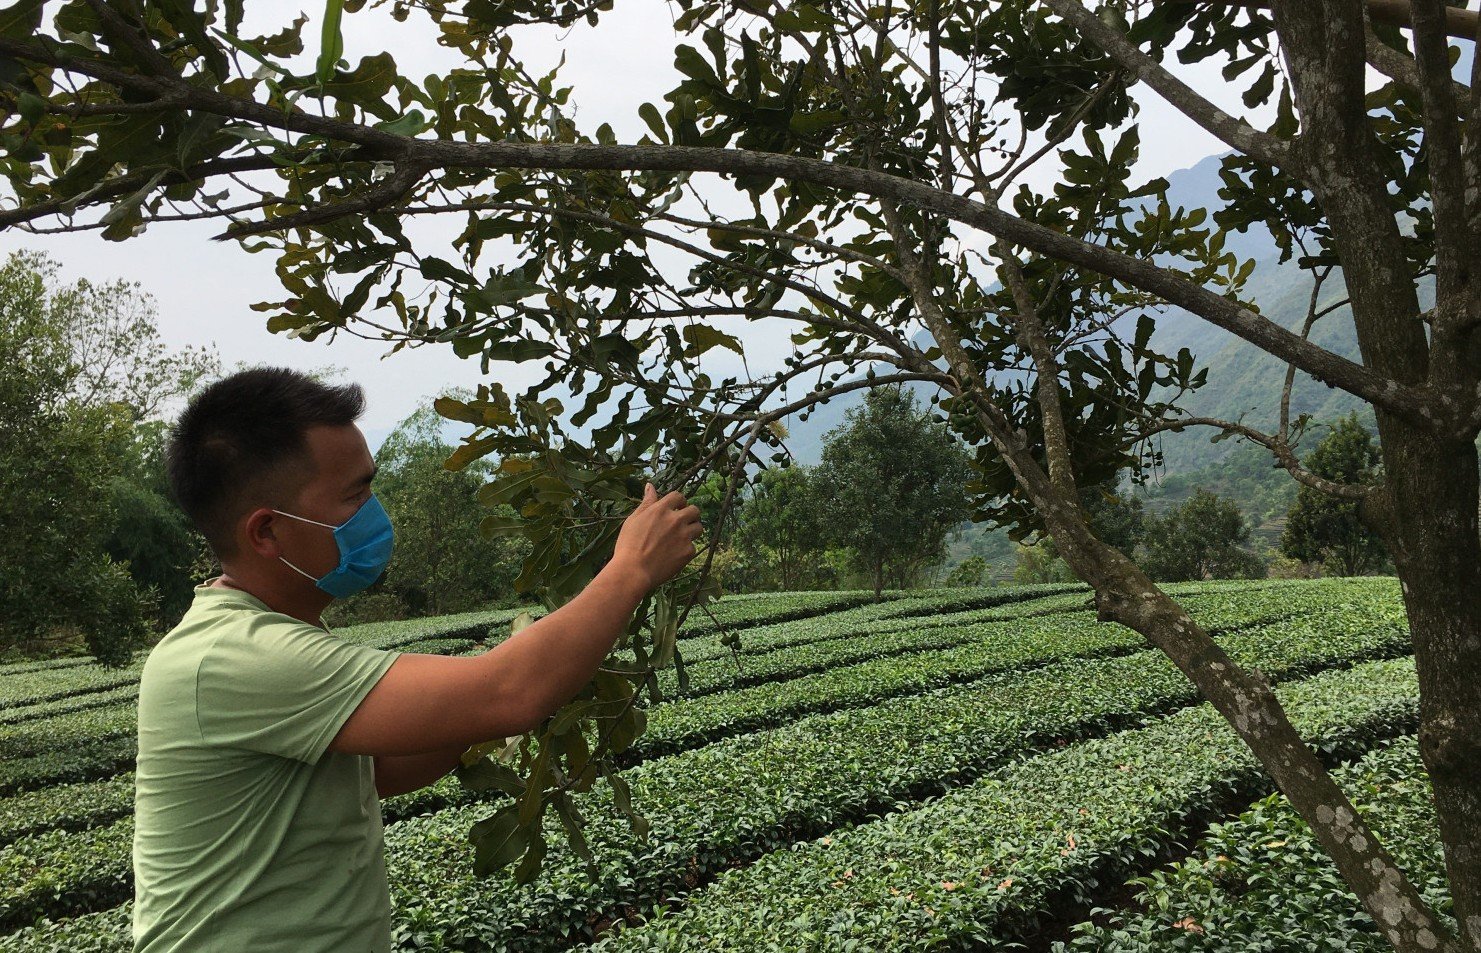 Macadamia trees are intercropped with tea trees in Ban Bo commune (Tam Duong district, Lai Chau province) both give high yields and help shade tea trees. Photo: T.L.